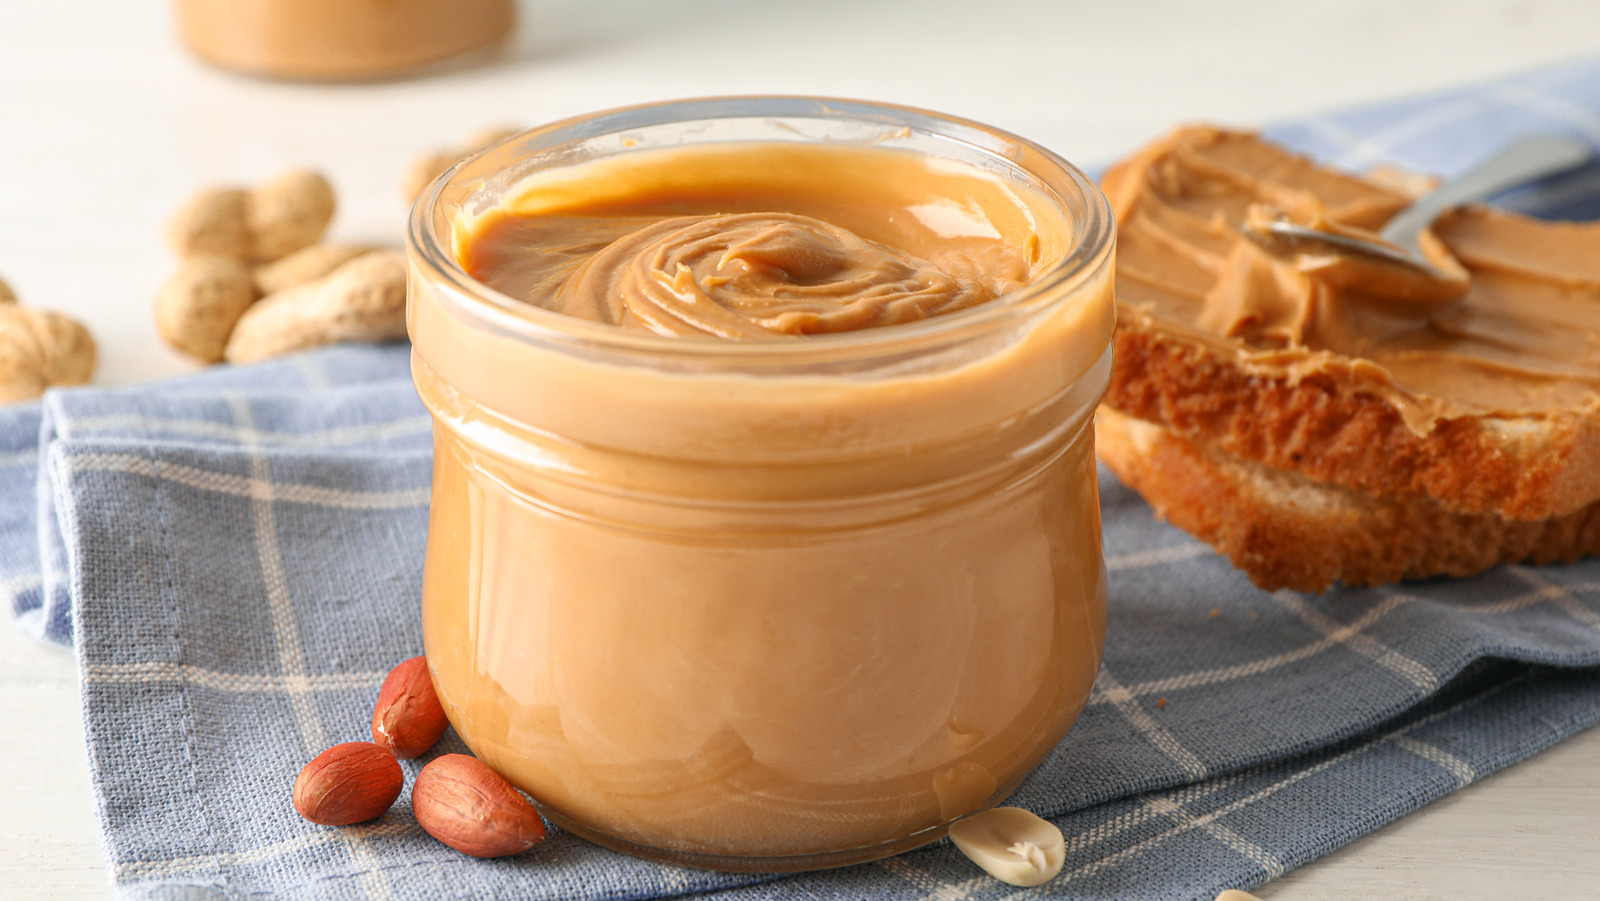 3 Ways to Measure Peanut Butter - wikiHow